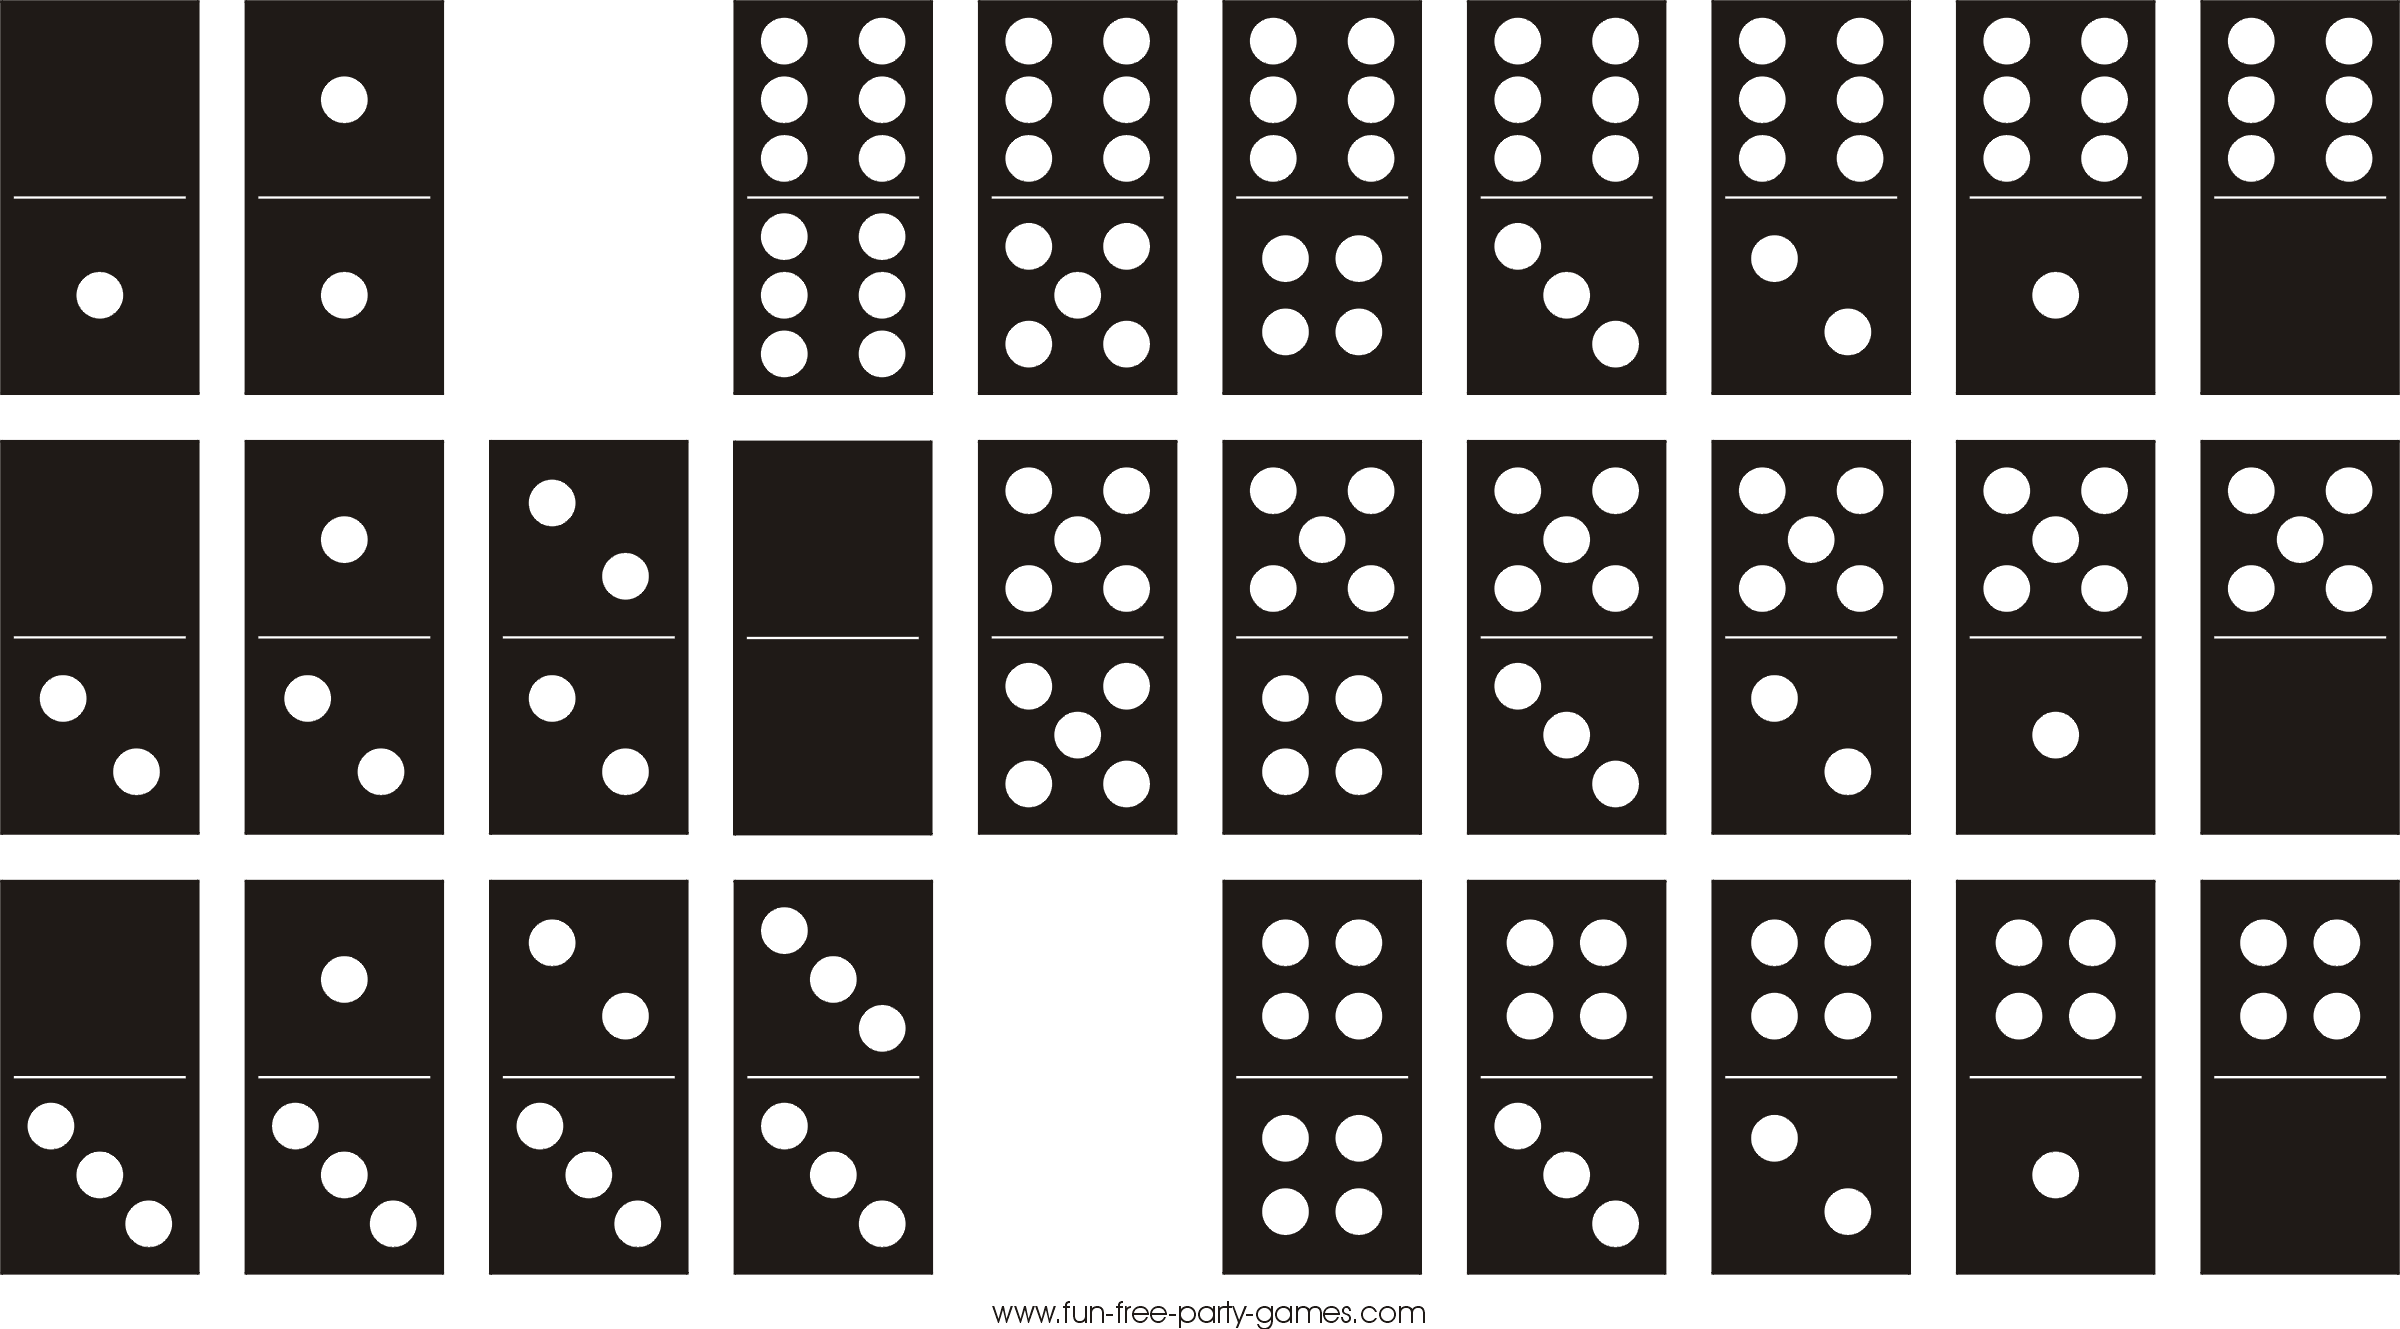 Dominoes Game Rules And Strategy   Best Traditional Table Games By Fun